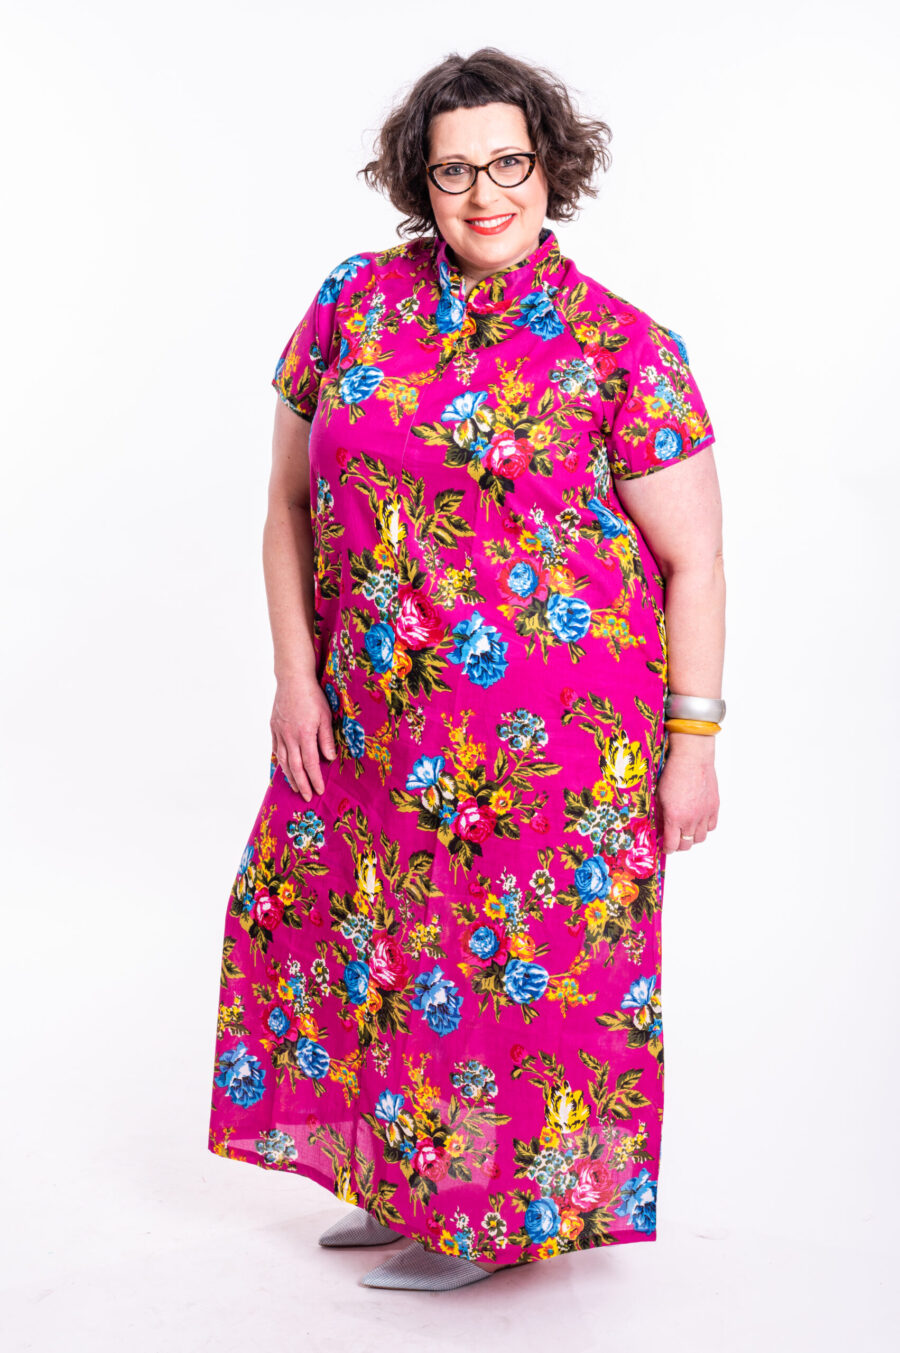 Maiko dress | Japanese dress with a unique high collar - a pink dress with a floral print